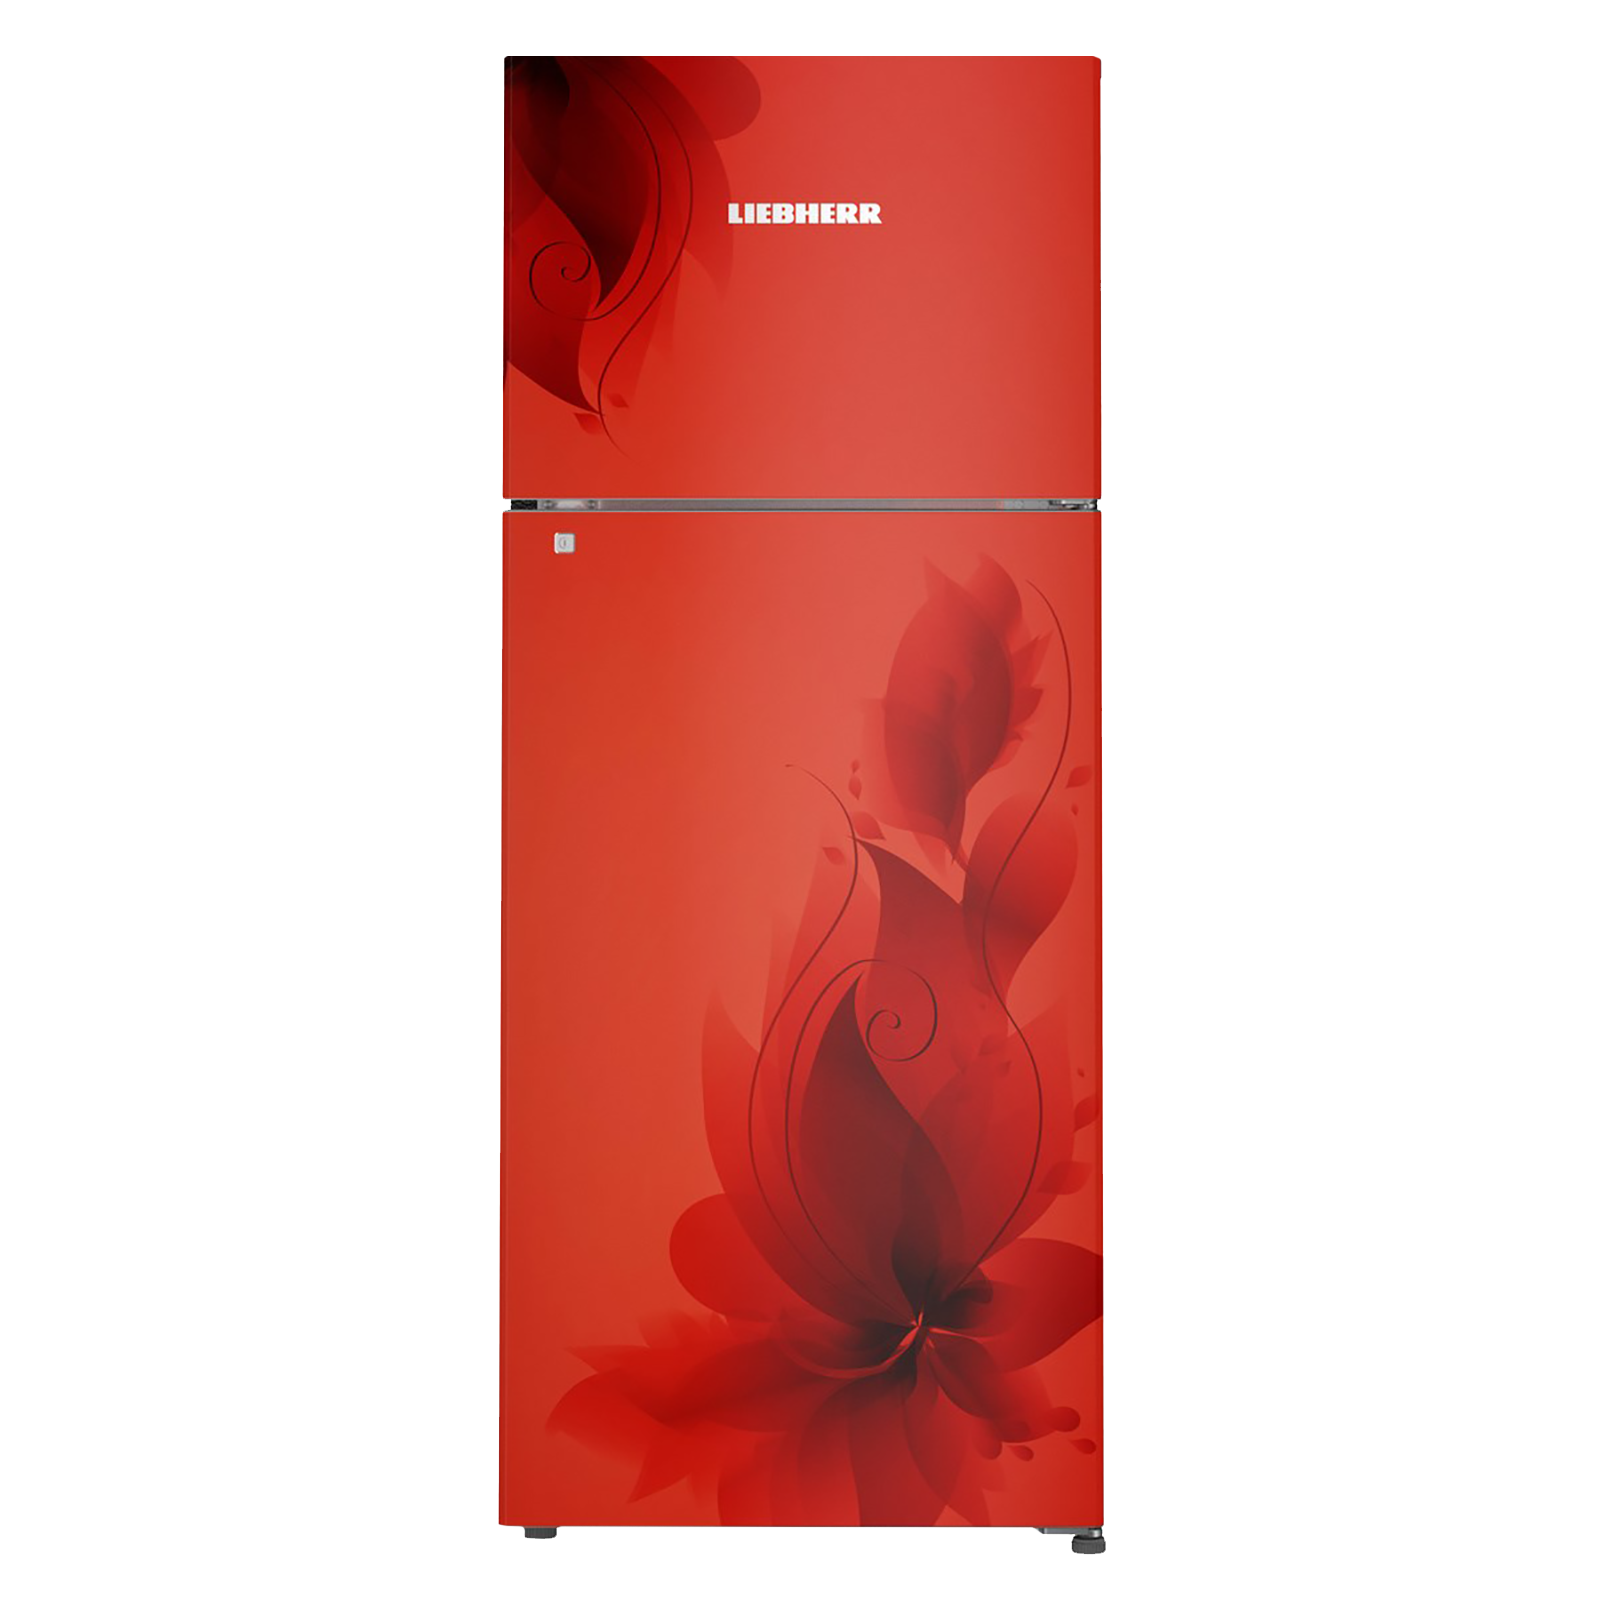 Liebherr 265 Litres 2 Star Frost Free Double Door Refrigerator with Multi Air Flow System (TCRF 2610, Red Floral)_1